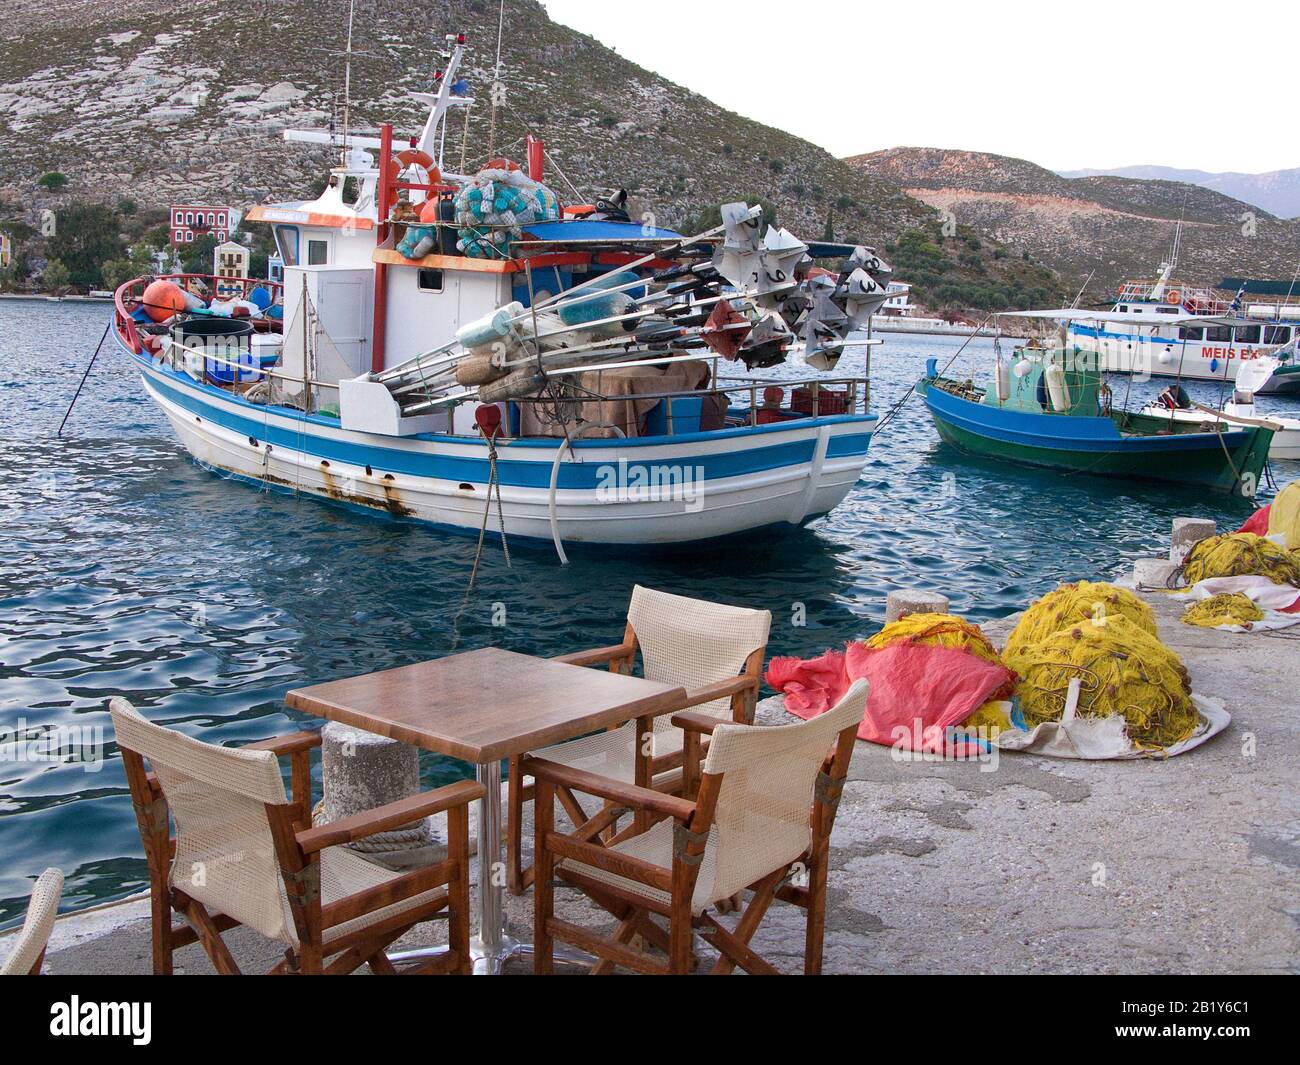 Evening mood at Meis island, also known as Kastellorizo, fishing boats in the harbour, Meis island, Greece Stock Photo